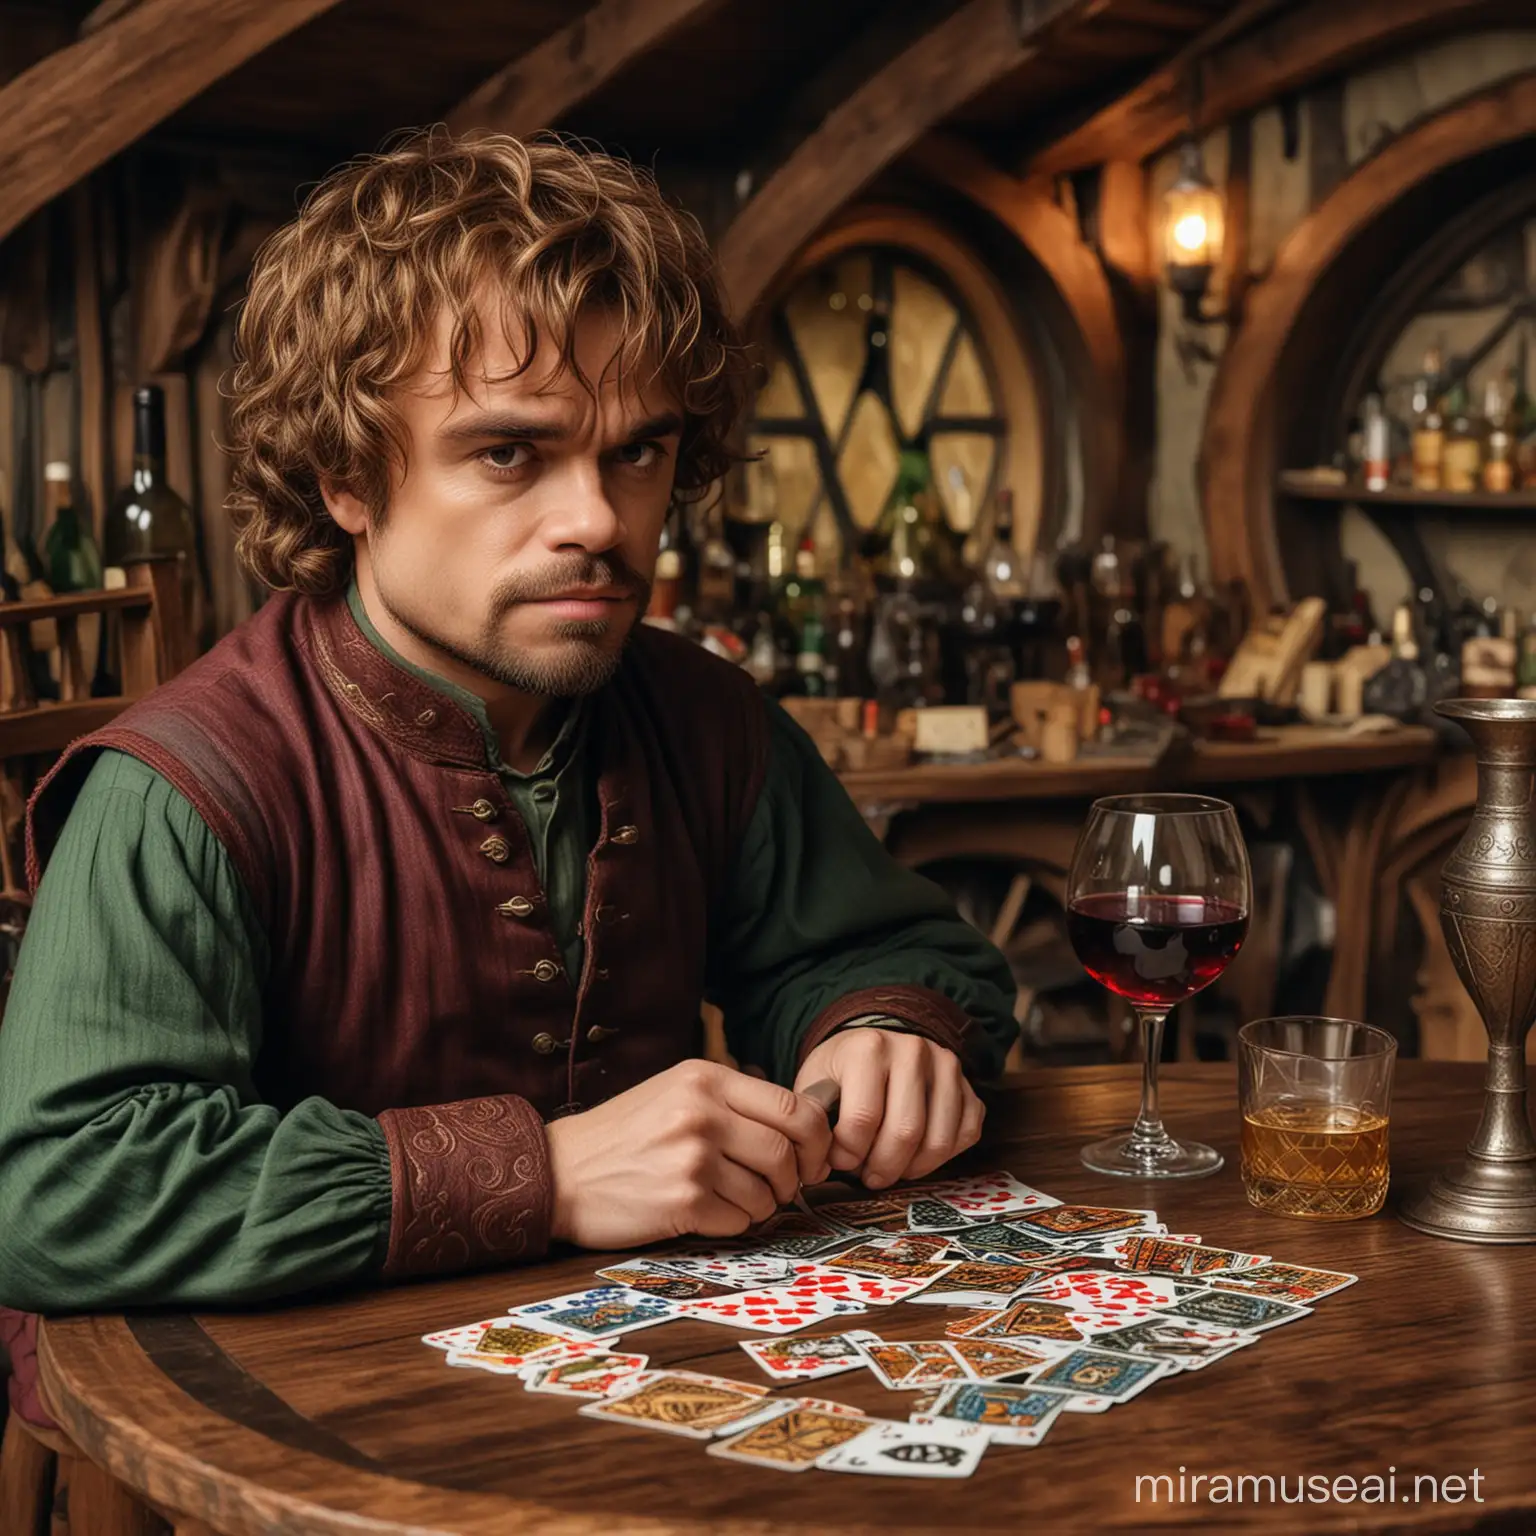 Foto of Tyrion Lannister drinking Wine and playing cards in a Hobbit House with Frodo Beutlin
